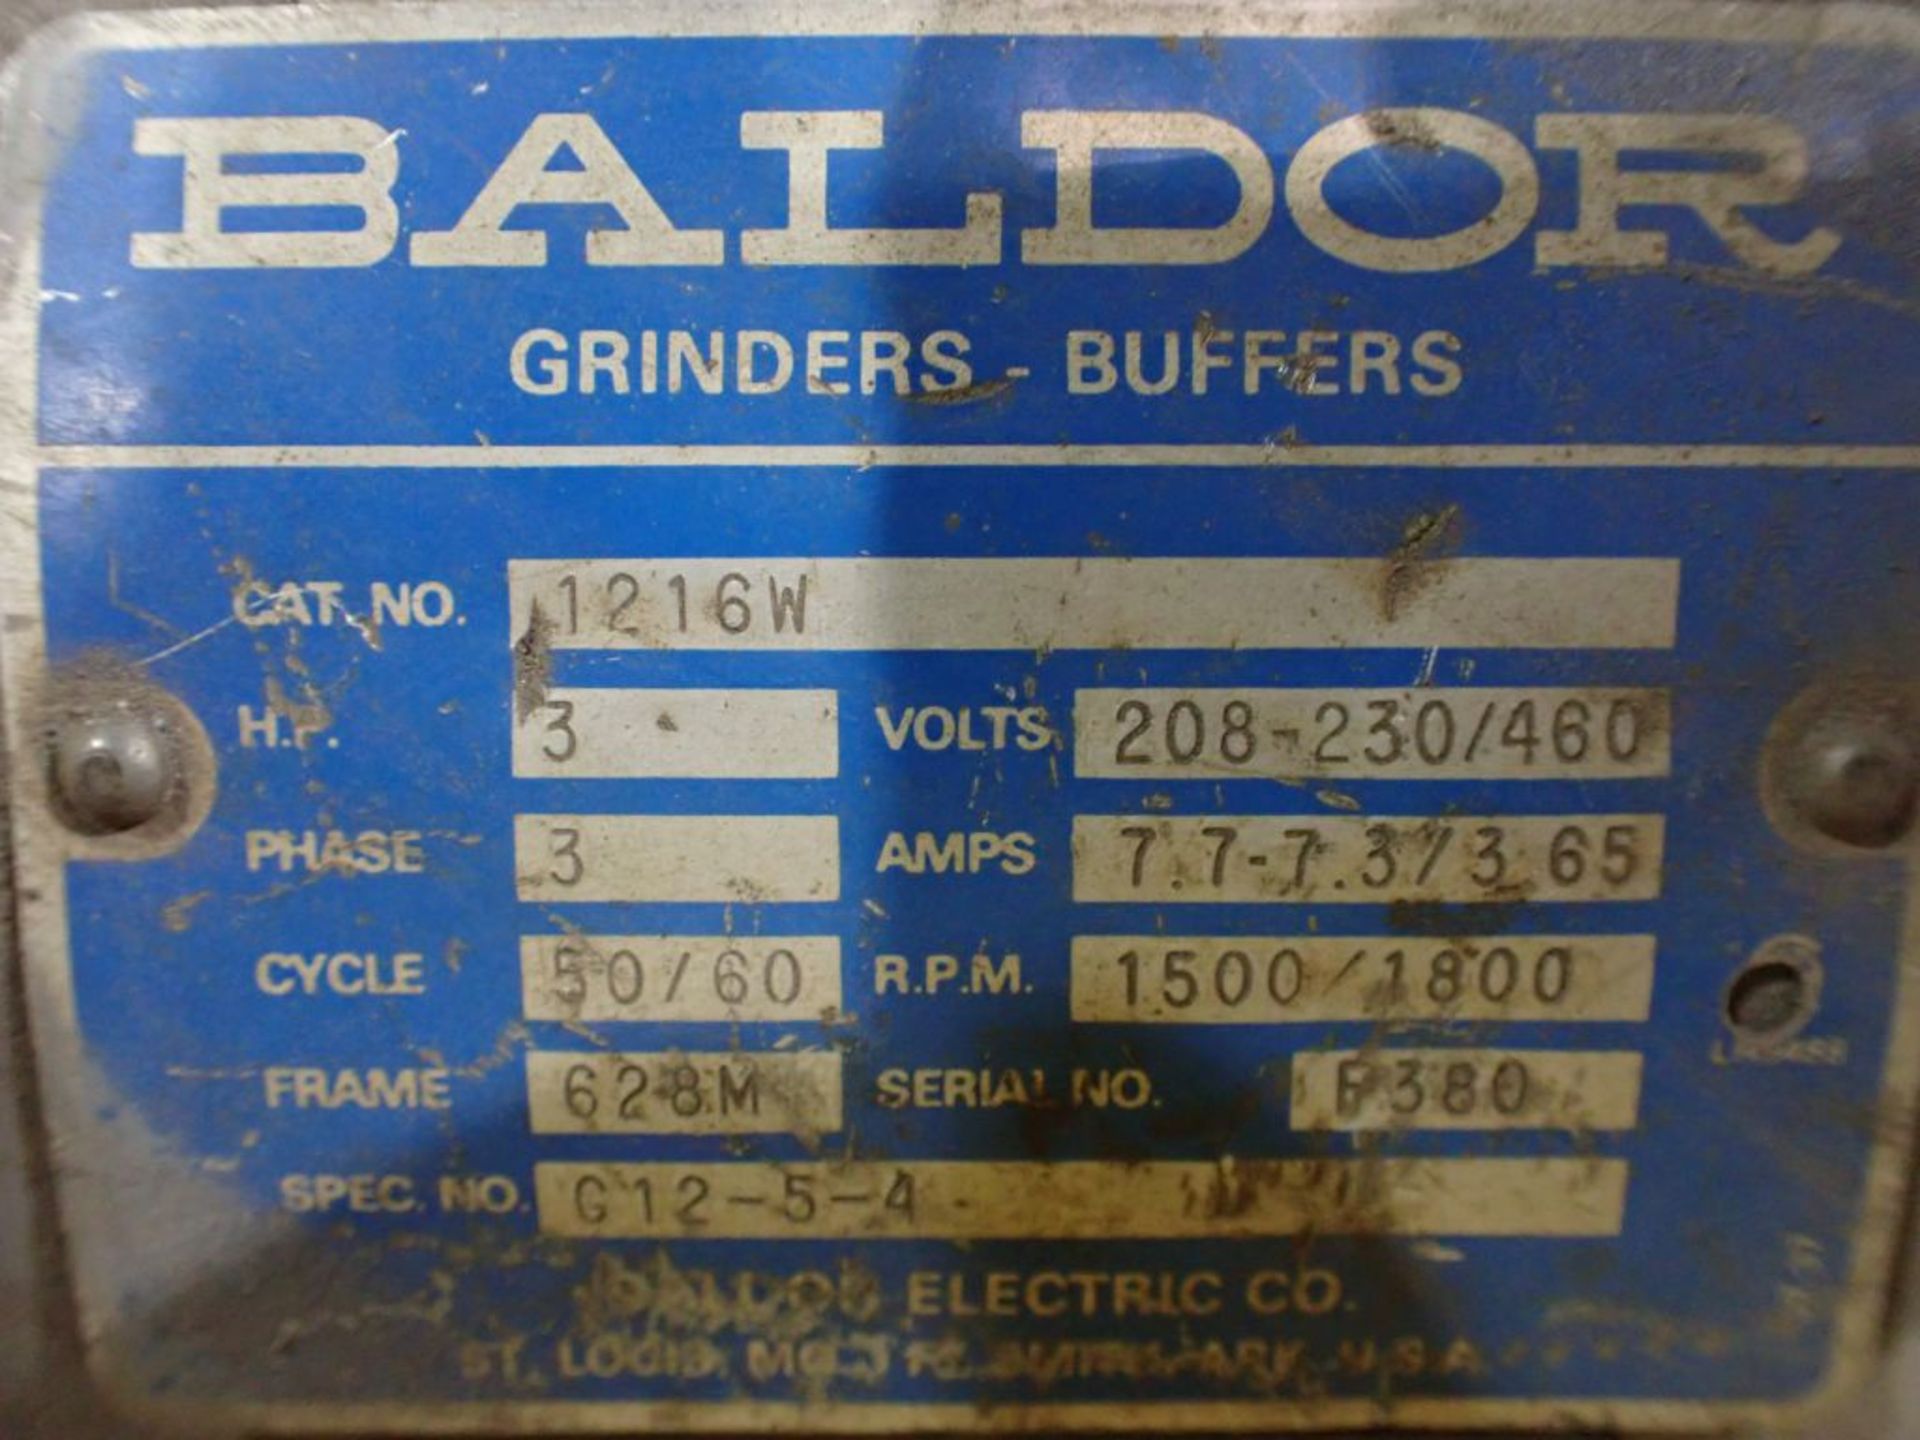 Baldor Double End Grinder | Cat No. 1216W; 3 HP; 7.7-7.373 65A; 208-230/460V; 1500/1800 RPM; 3PH - Image 7 of 8